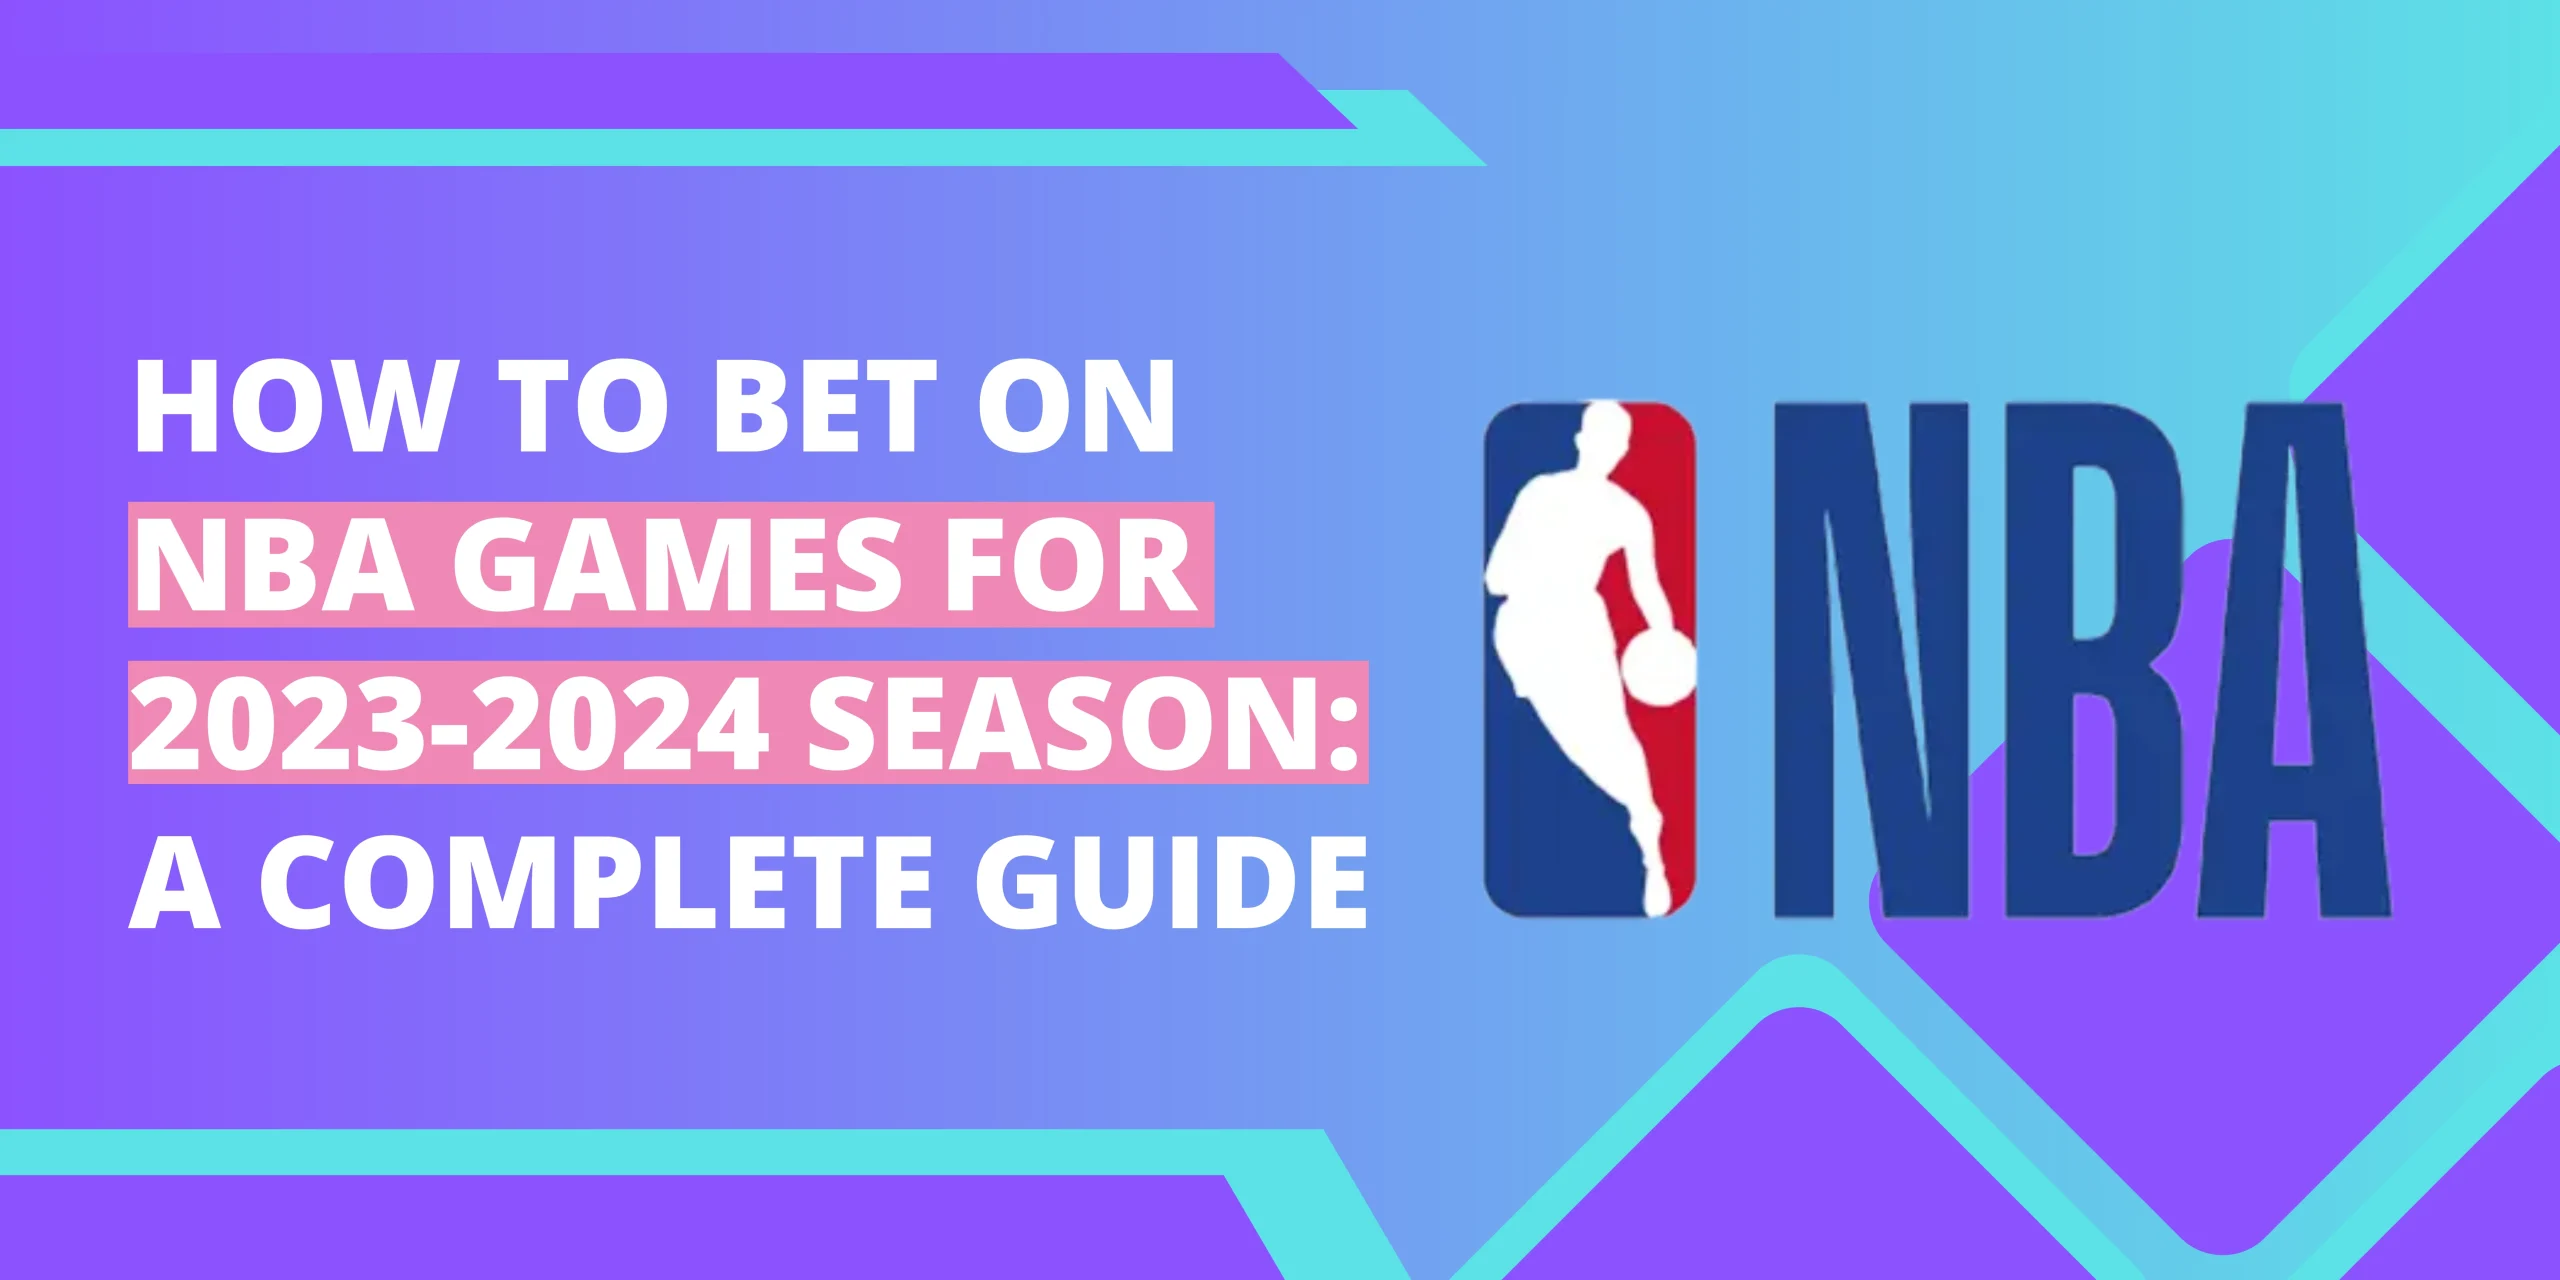 How to Bet on NBA Games for 2023-2024 Season: A Complete Guide